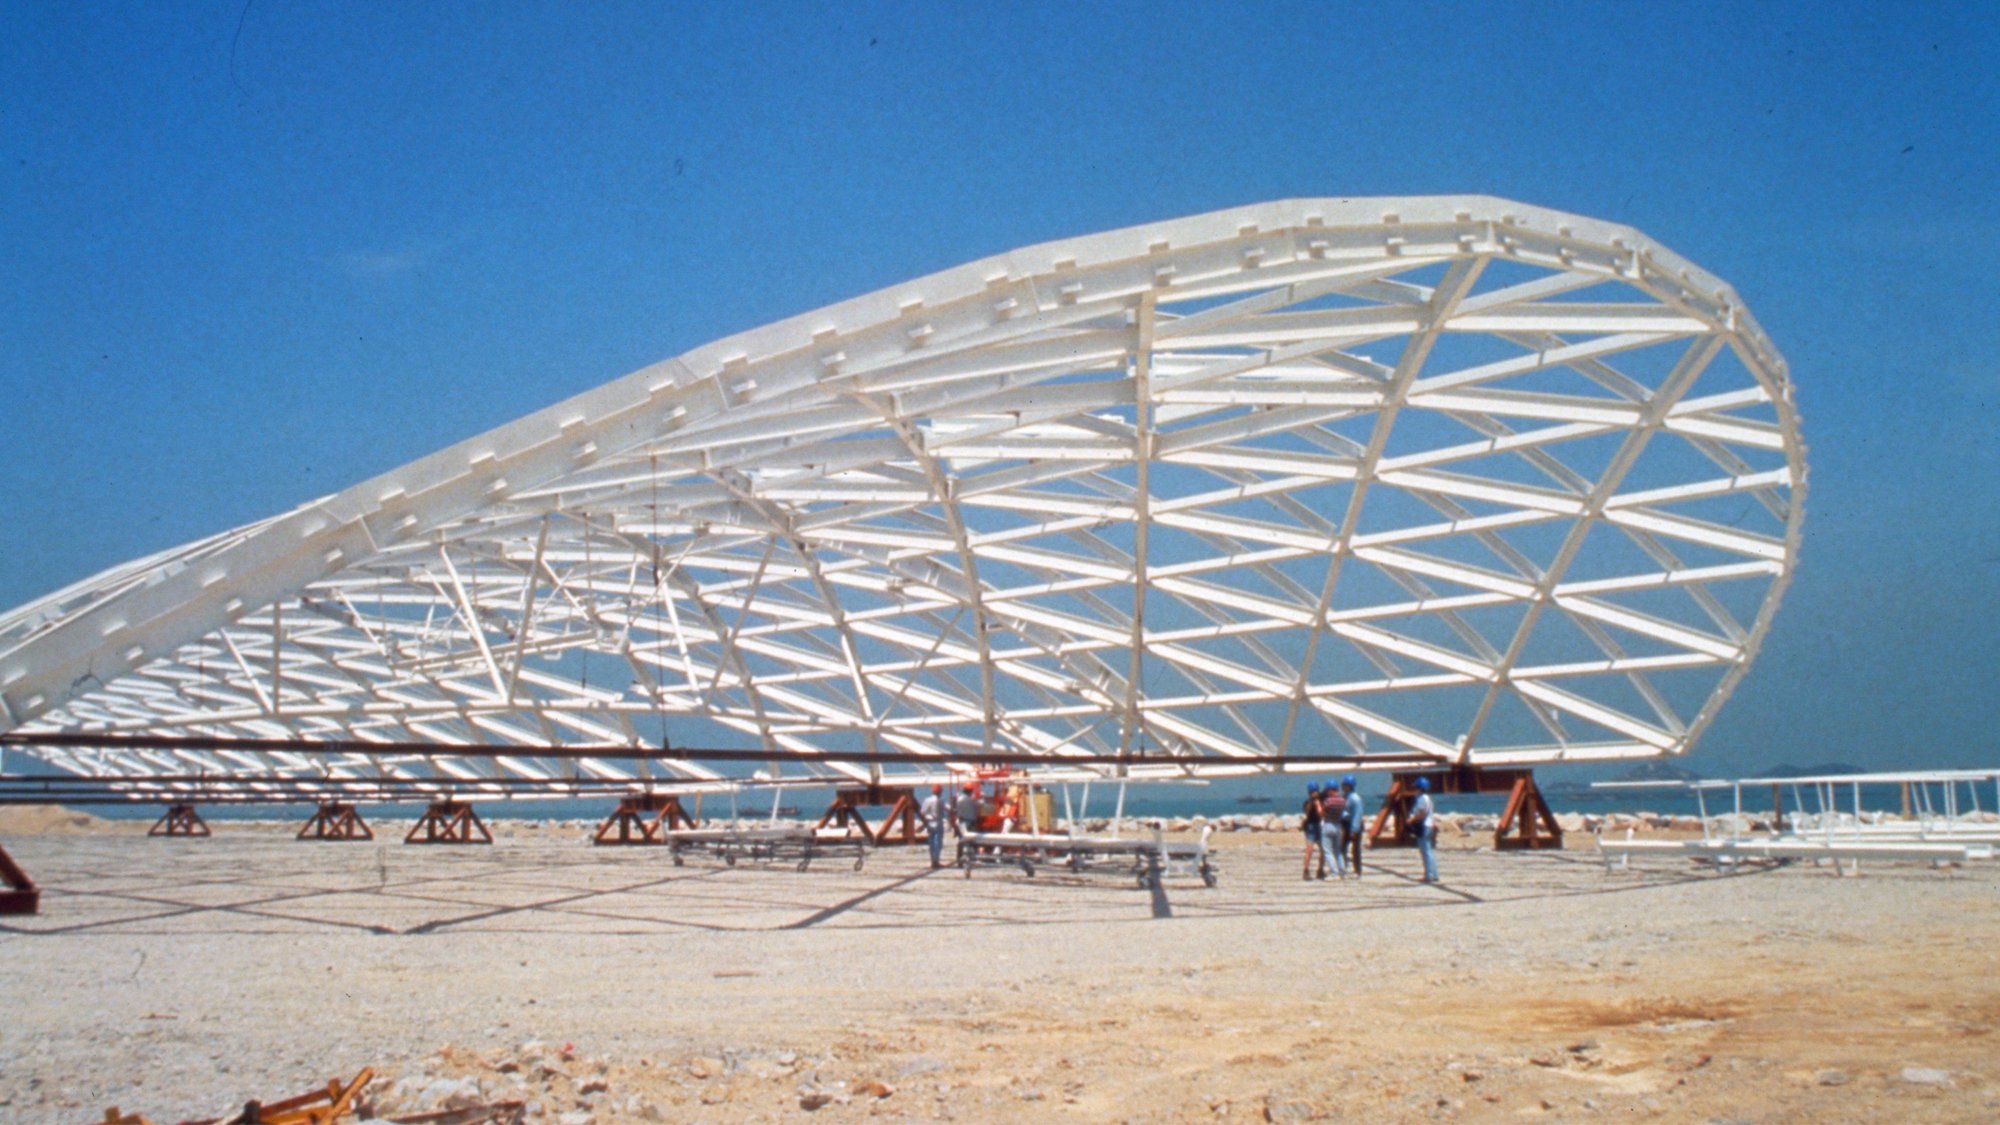 View of the airport during construction phase. Credit: Arup.